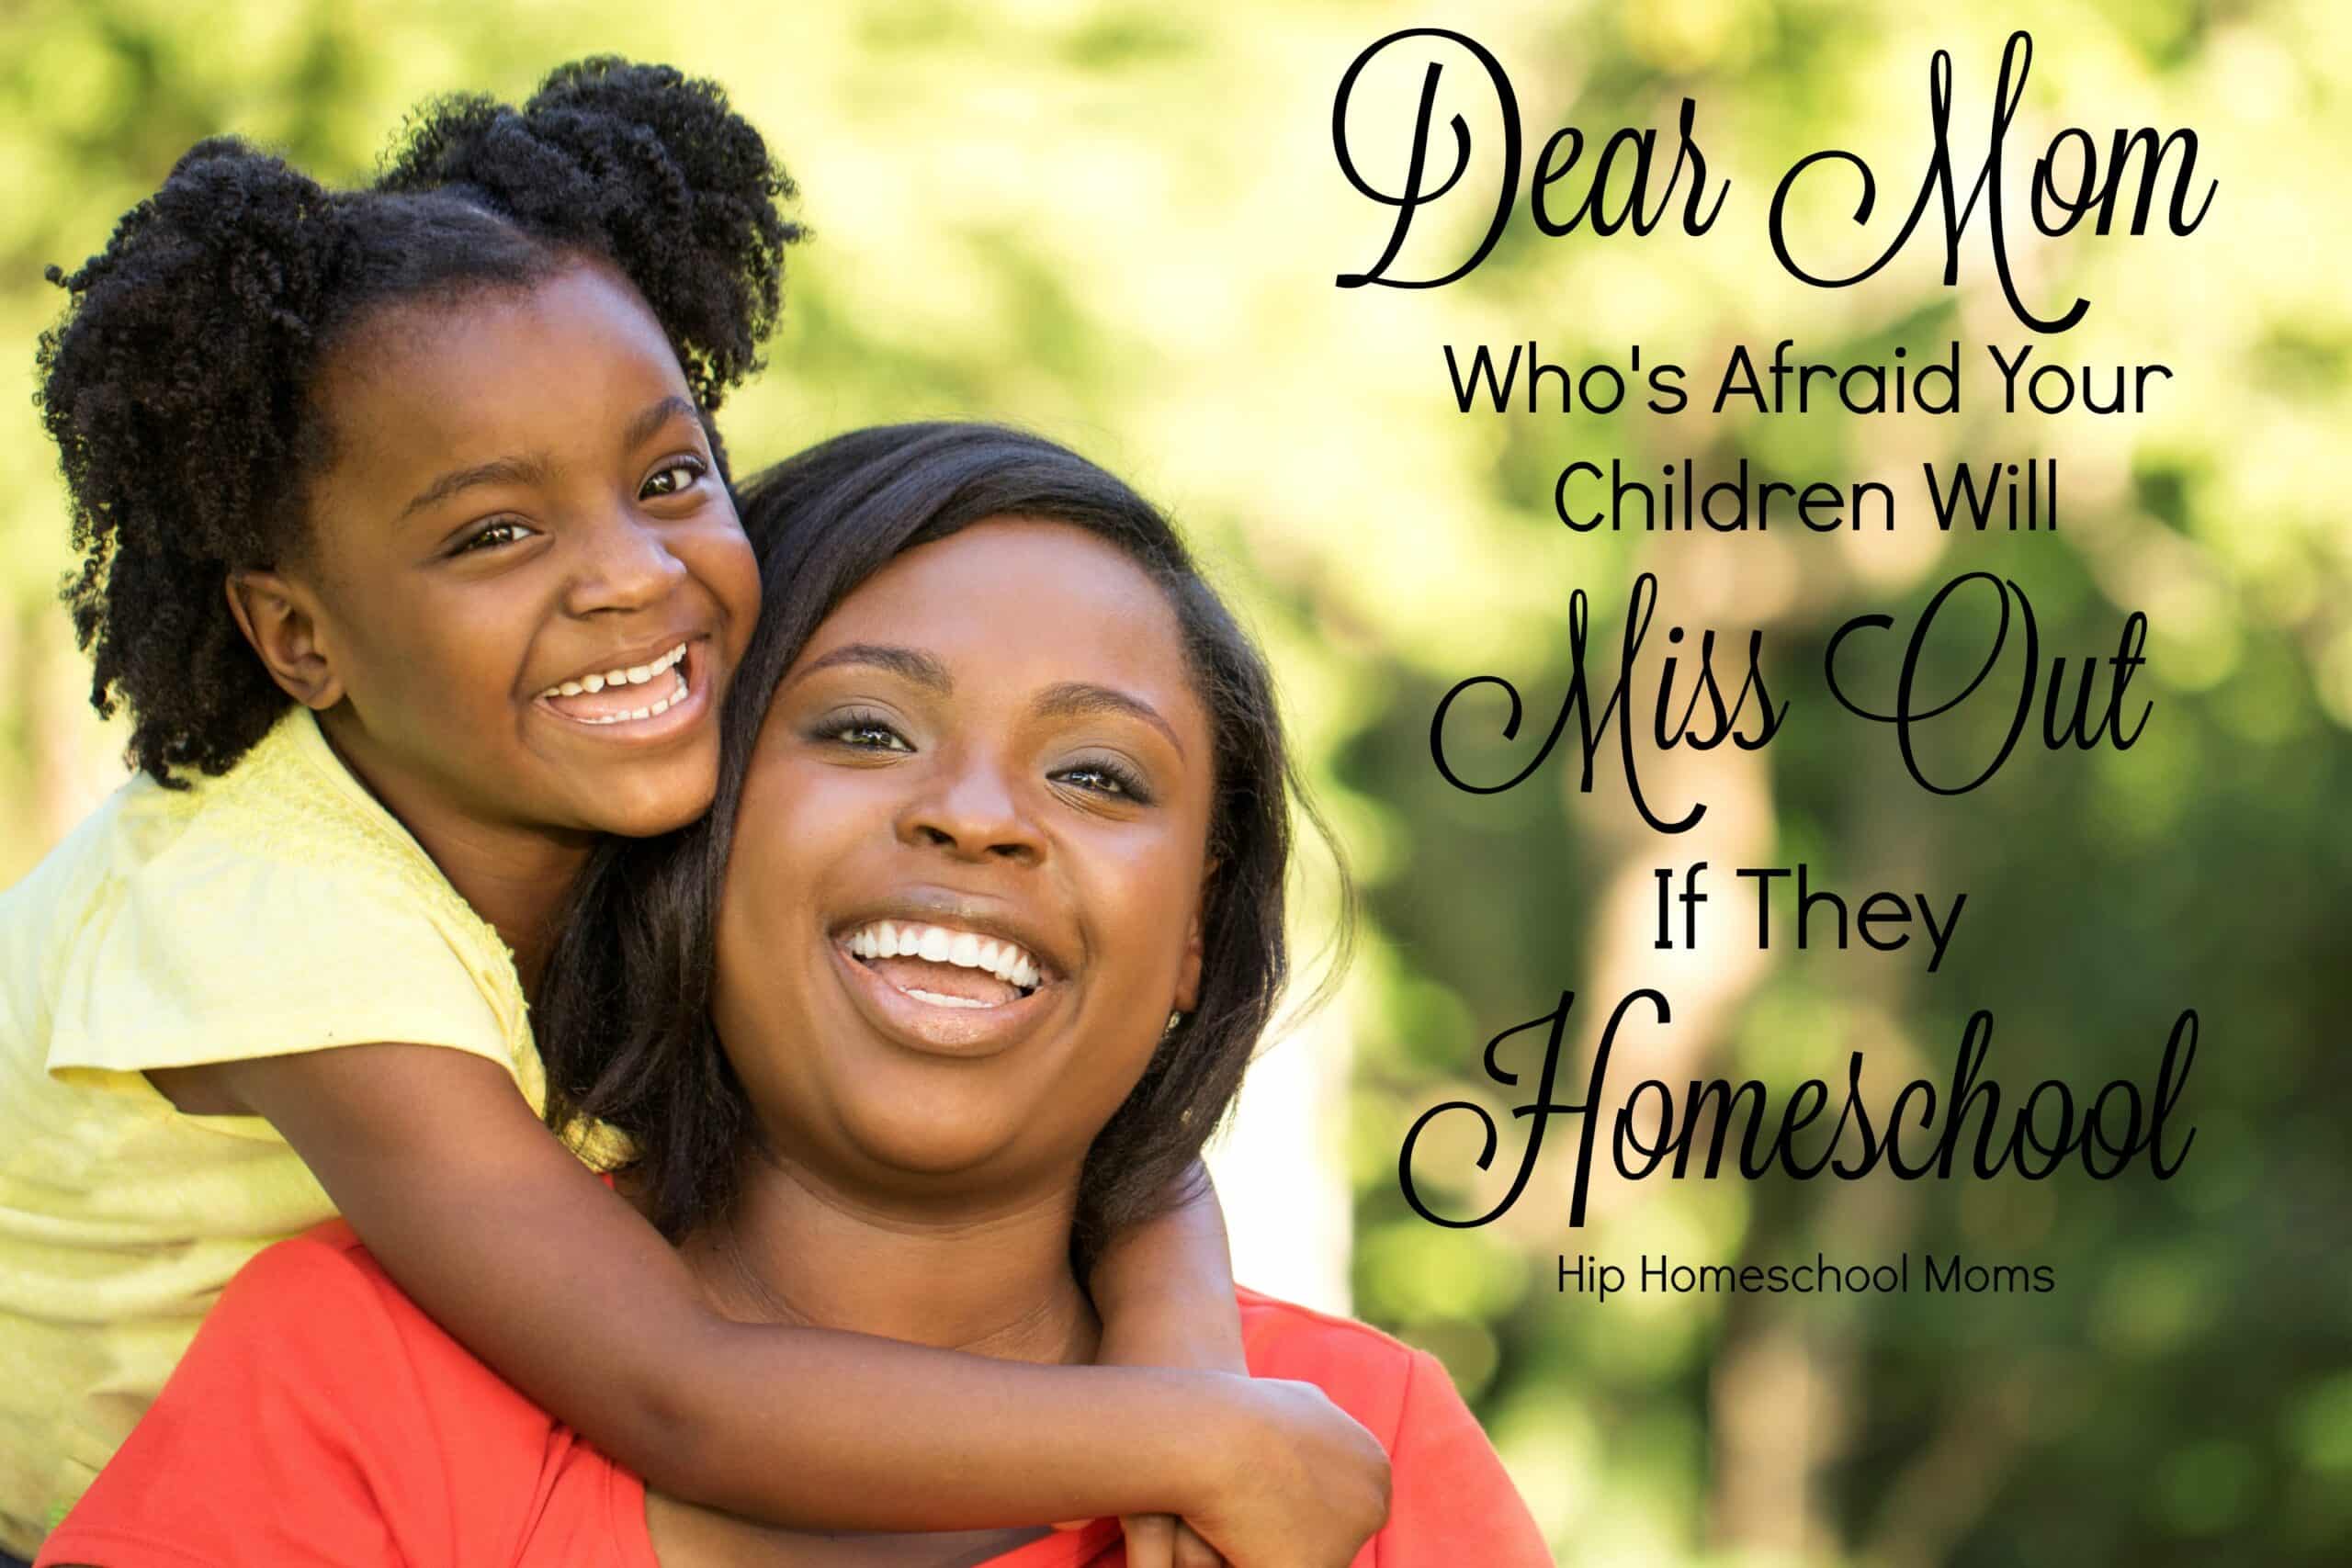 Dear Mom Who’s Afraid Your Children Will Miss Out if They Homeschool